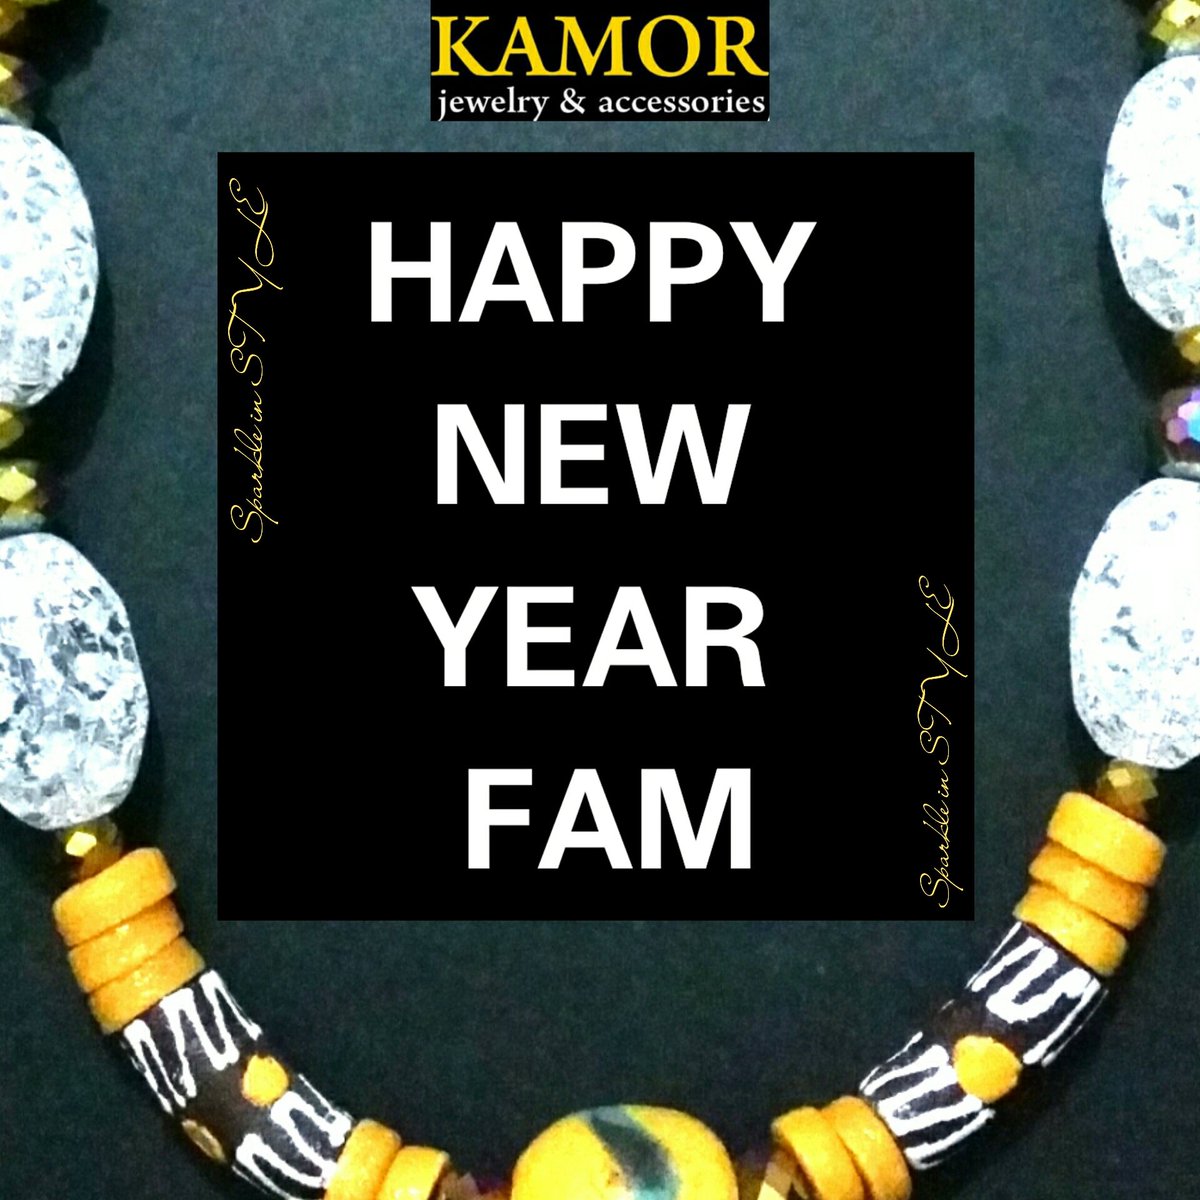 #Beads #Bracelets #Necklaces #Earrings #Anklets #Waistbeads #Brooches #Jewelry #Fashion #Retail #Wholesale #Handmade #menjewelry #menfashion #womenjewelry #womenfashion #kidsjewelry #kidsfashion #accessories #gifts #souvenir #madeinghana #brides #bridesmaids #grooms #groomsmen